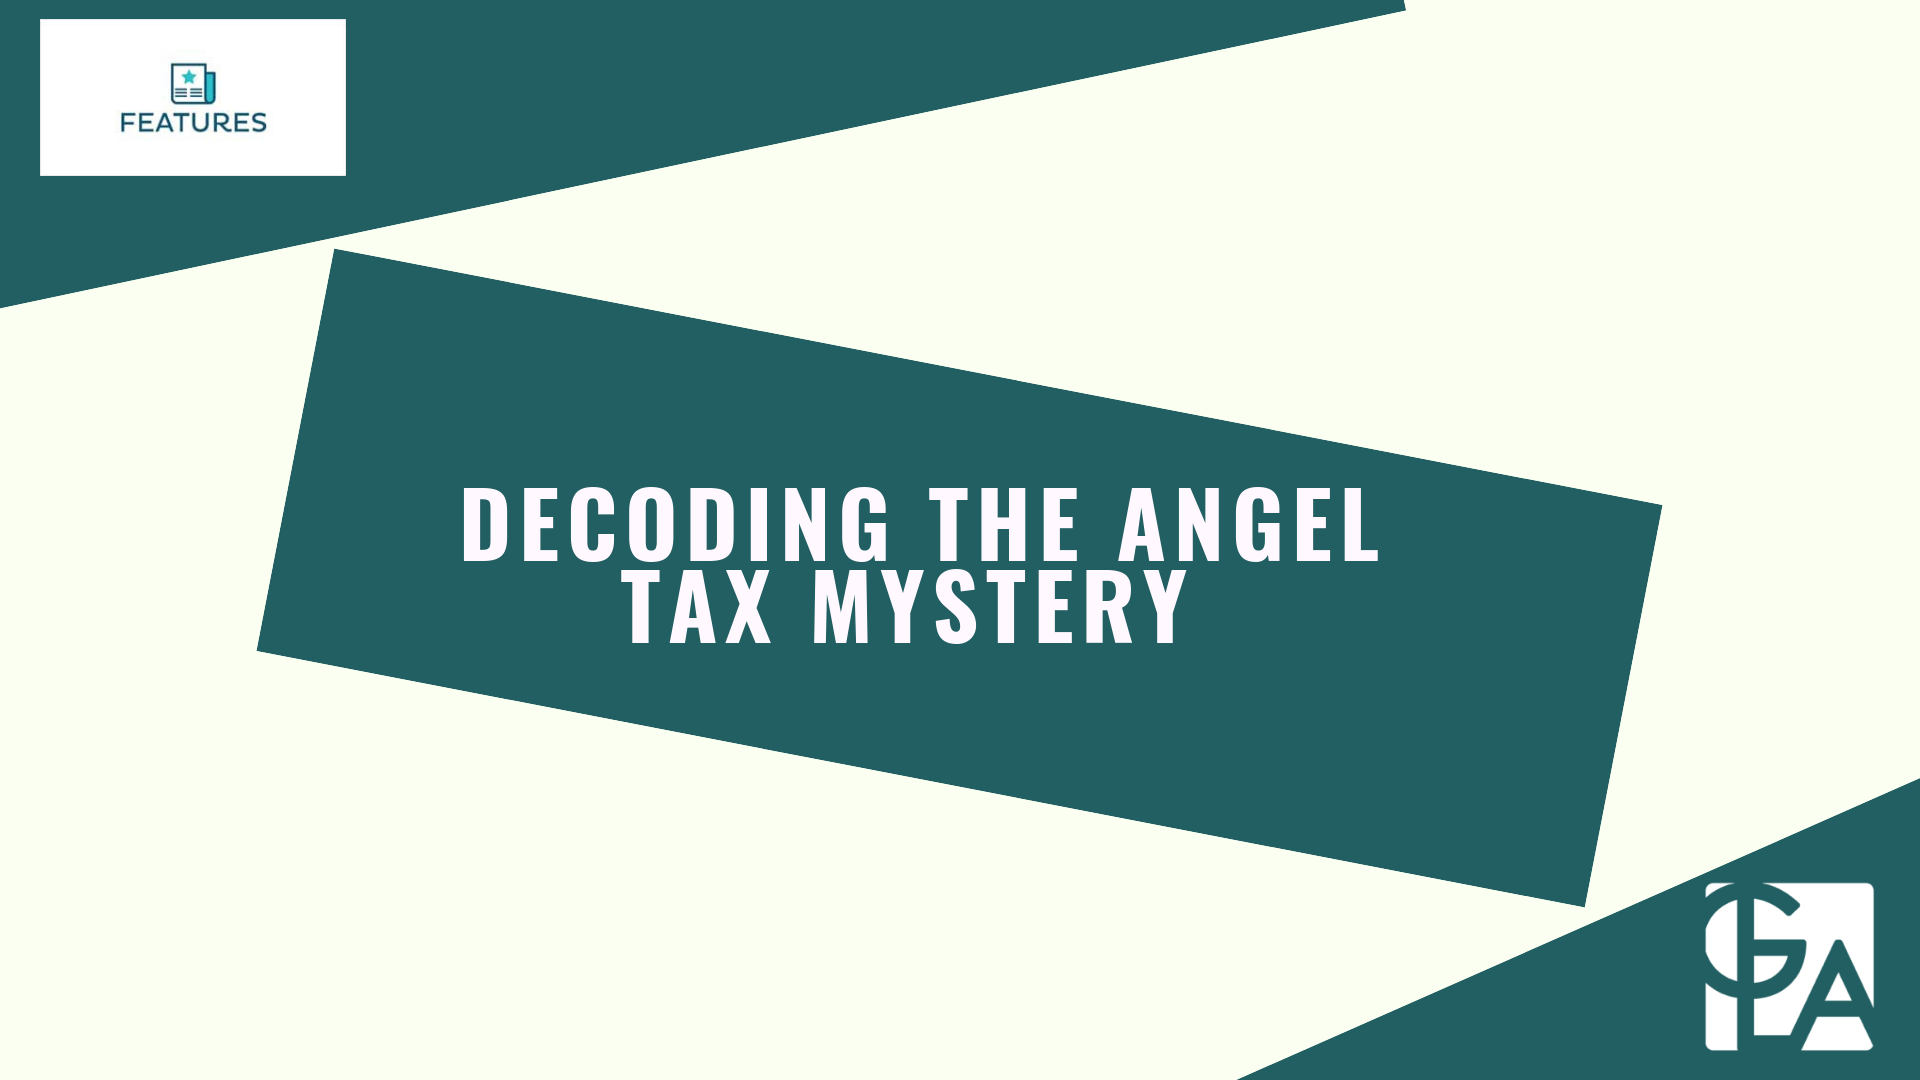 Will Angel Tax Finally be Angelic? The Devil is in the Detail